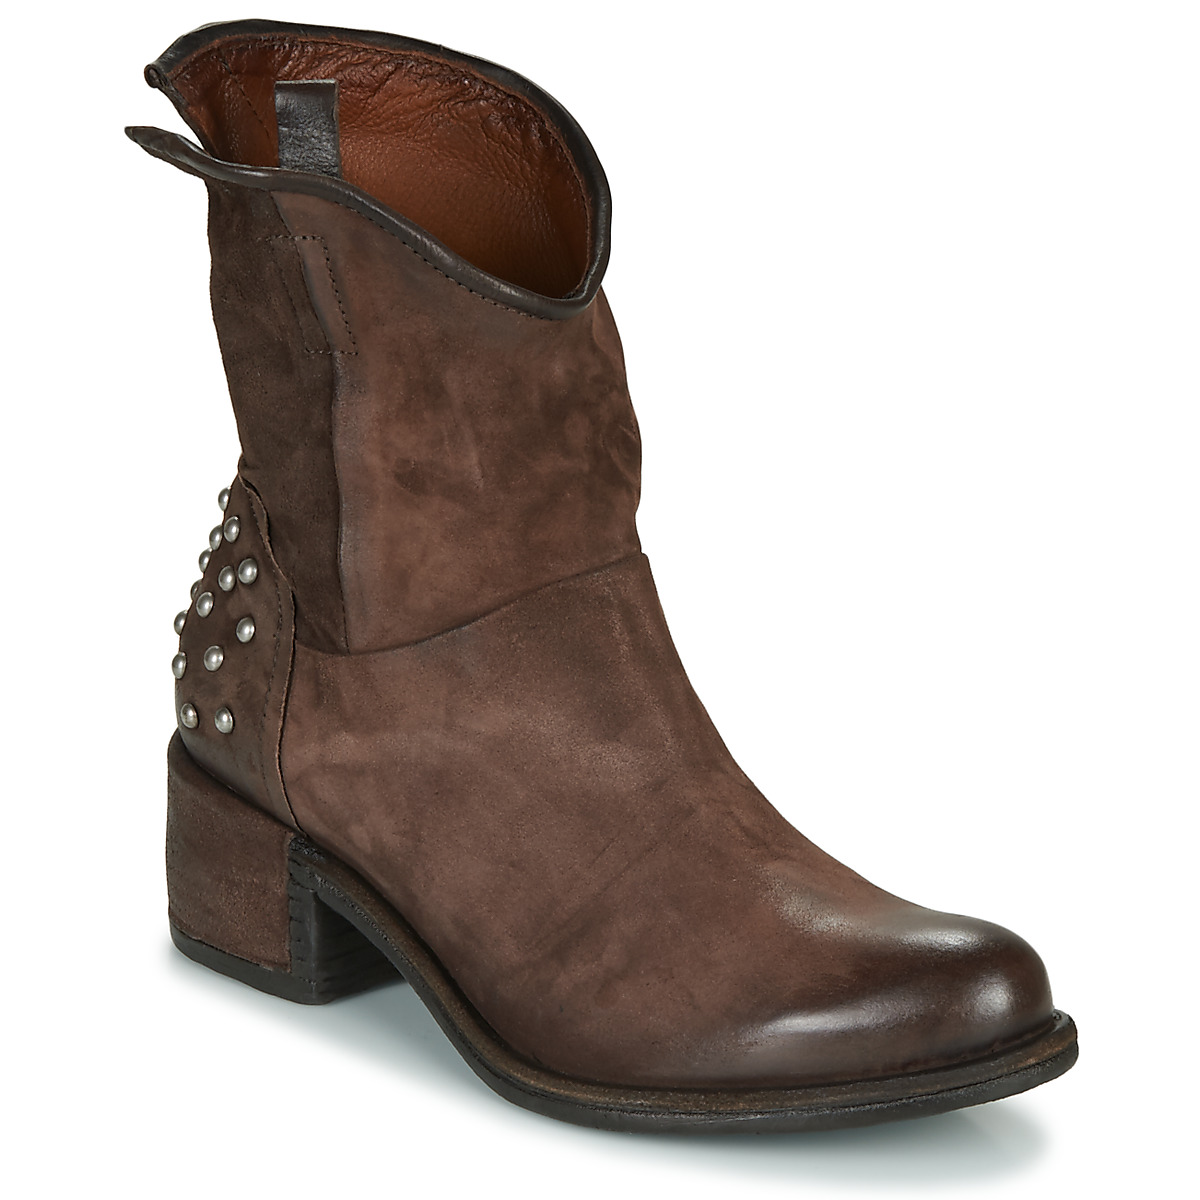 airstep / a.s.98  opea studs  women's low ankle boots in brown